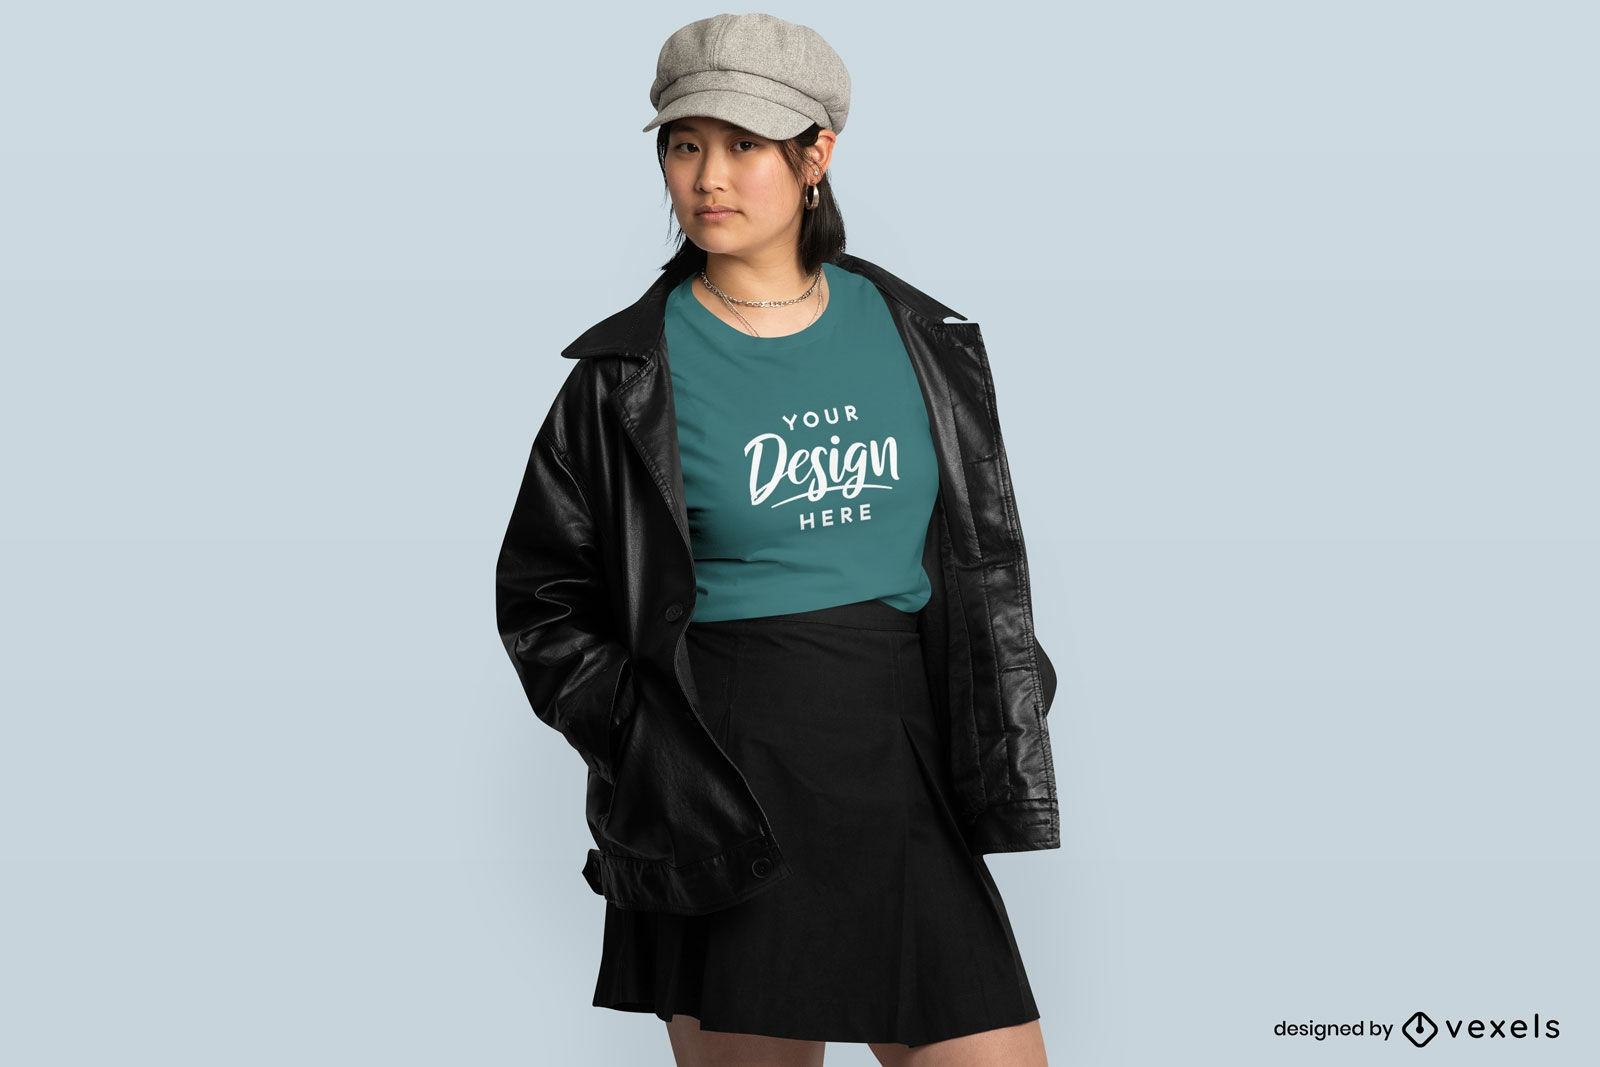 Asian girl in leather jacket and t-shirt mockup